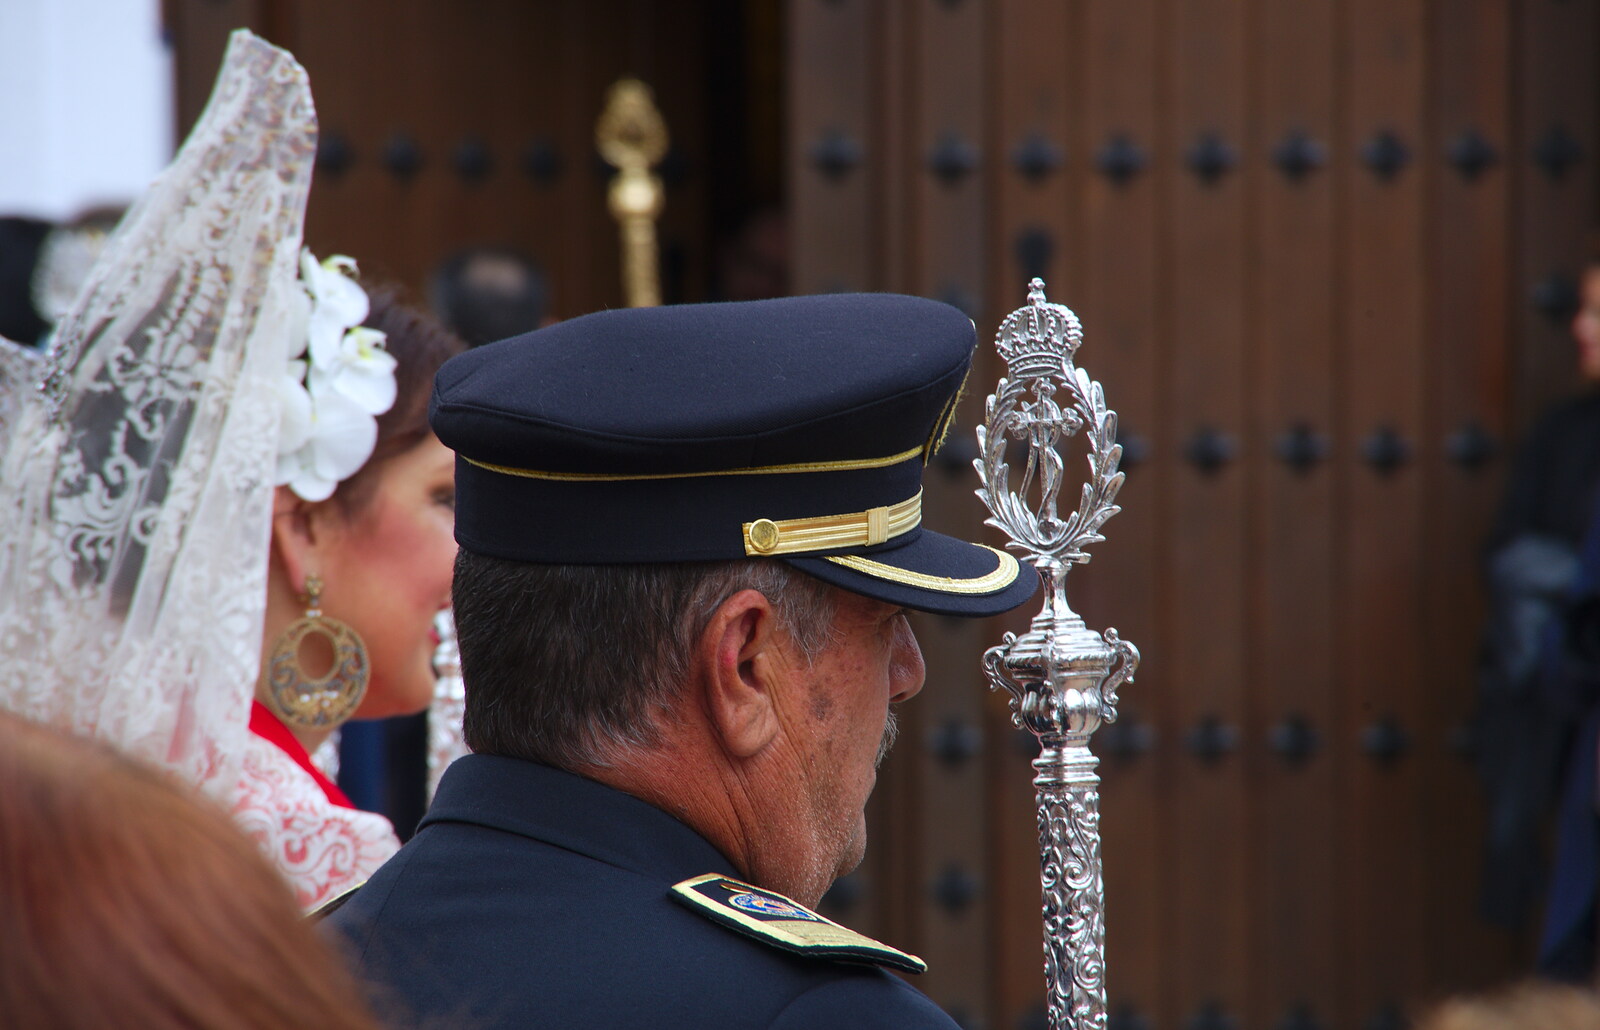 Bloke with a silver staff from An Easter Parade, Nerja, Andalusia, Spain - 21st April 2019